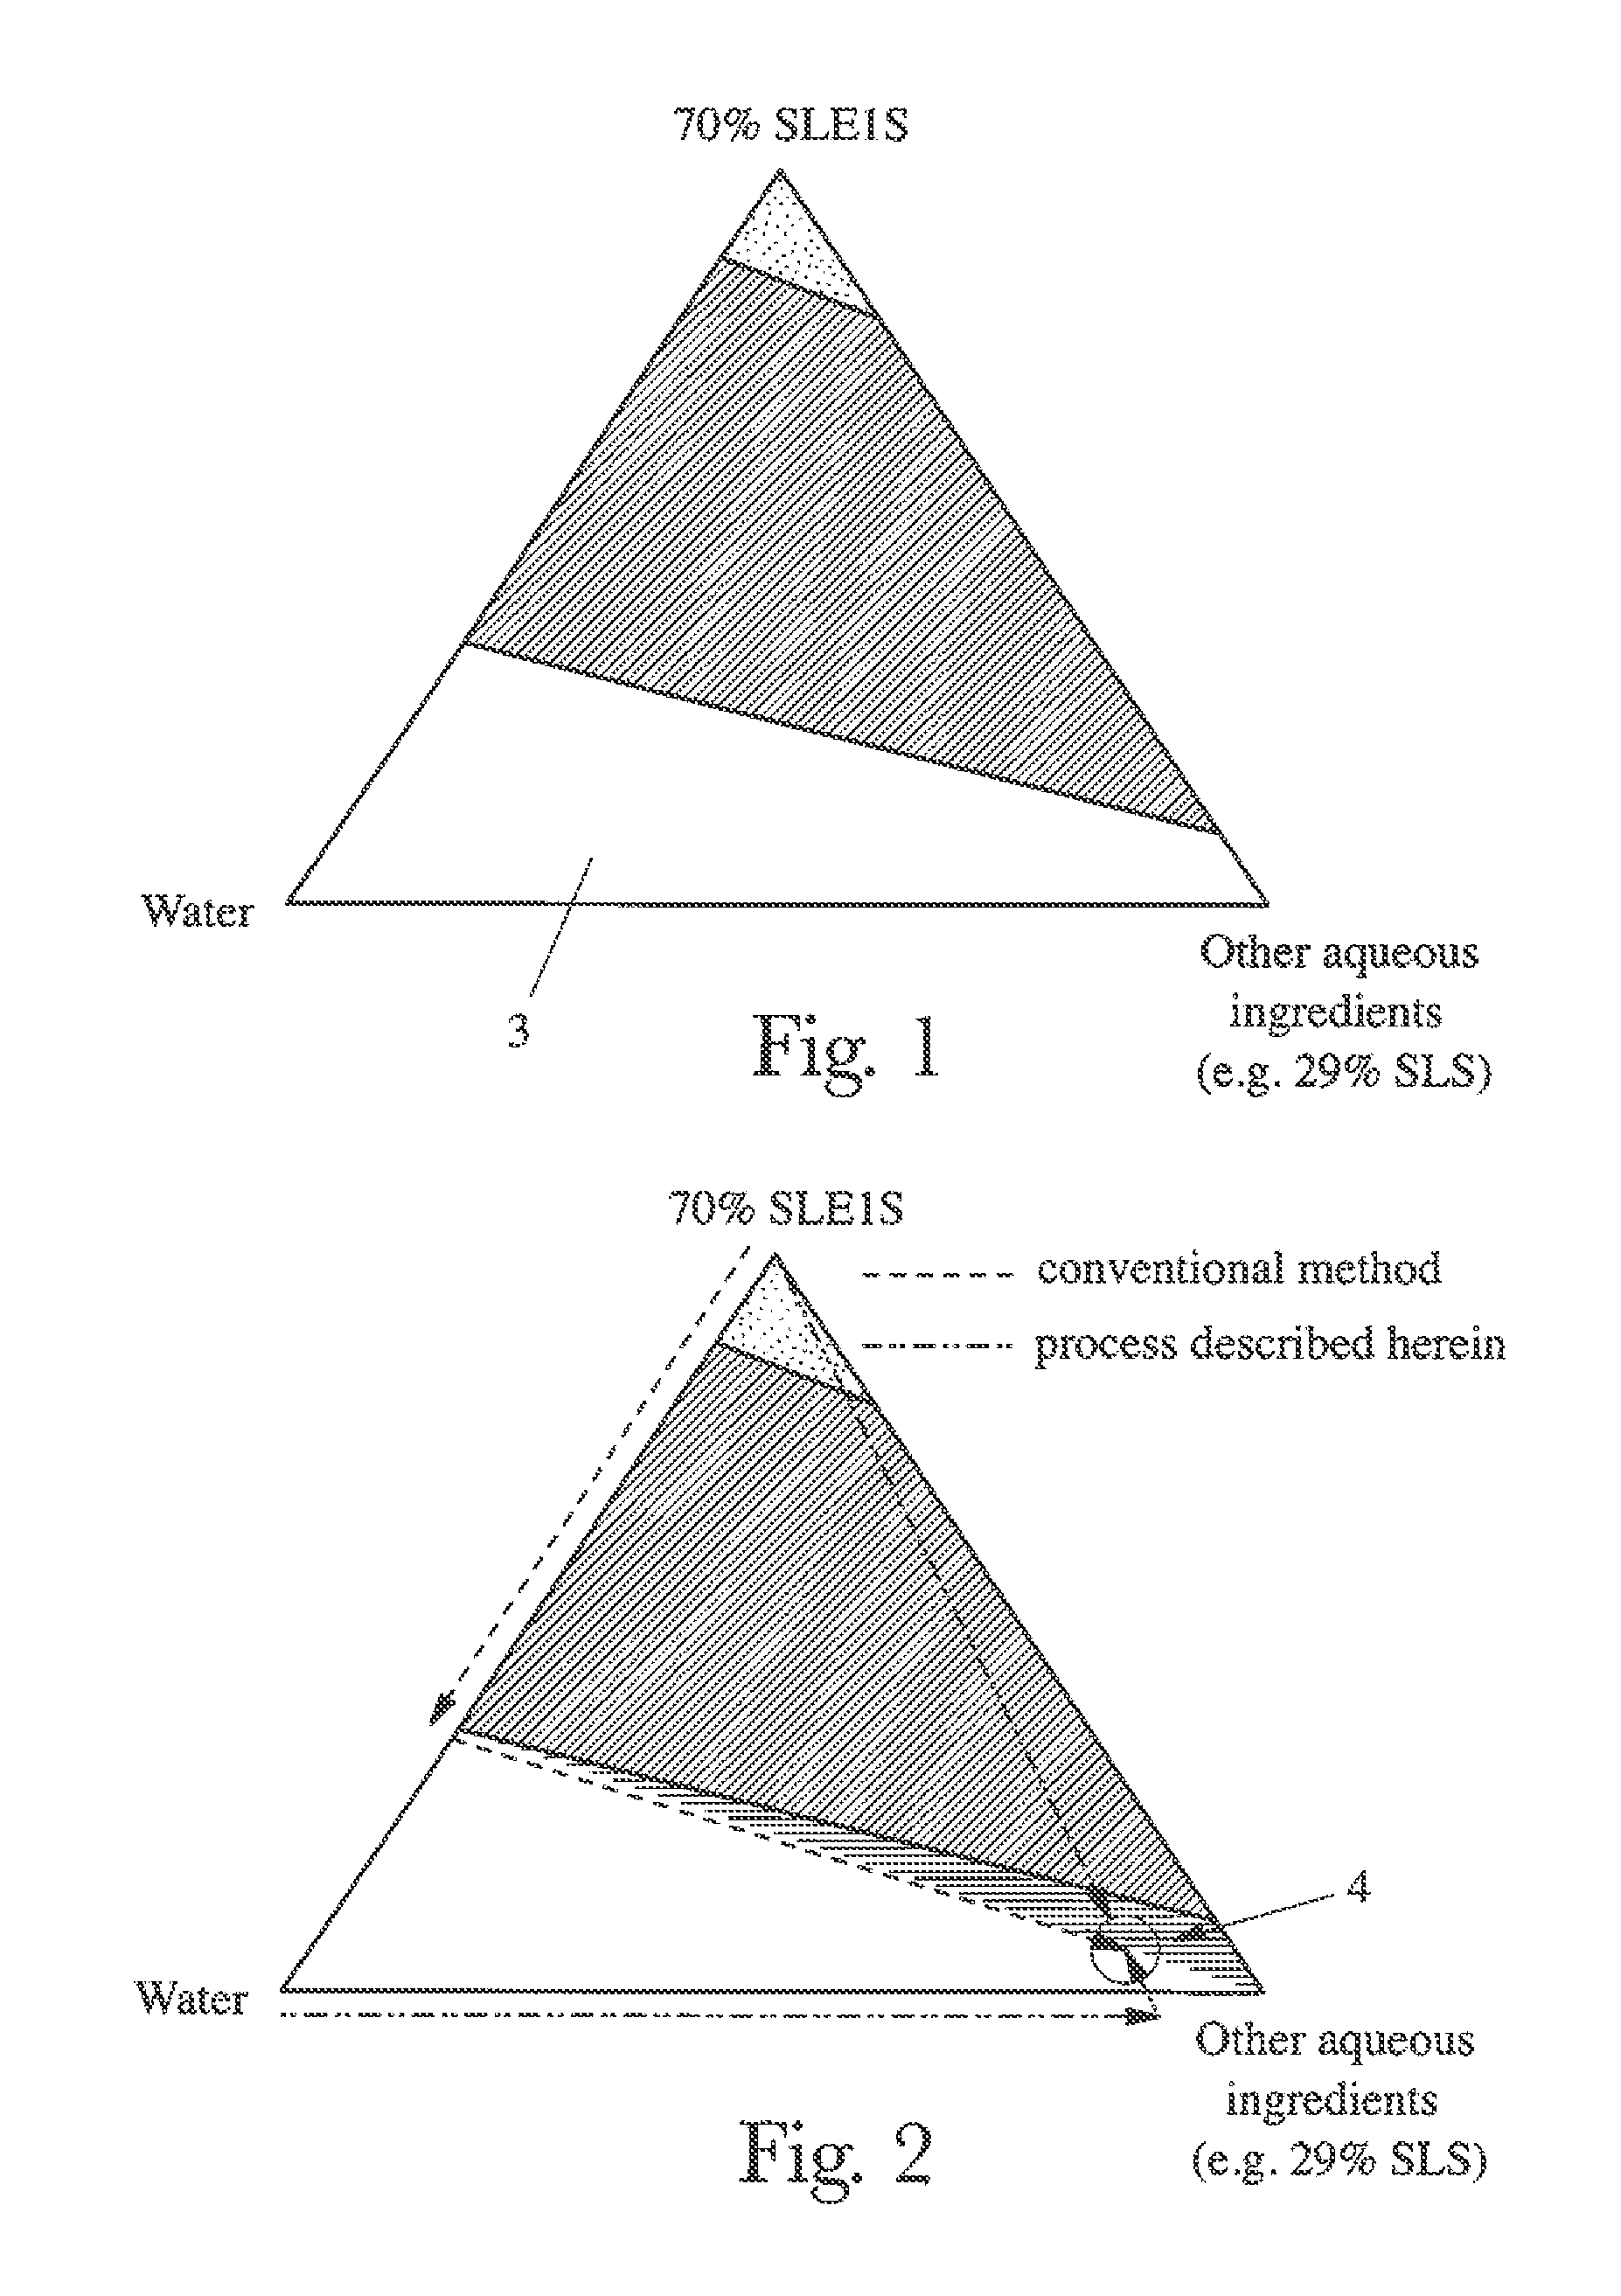 Process for making a cleaning composition employing direct incorporation of concentrated surfactants